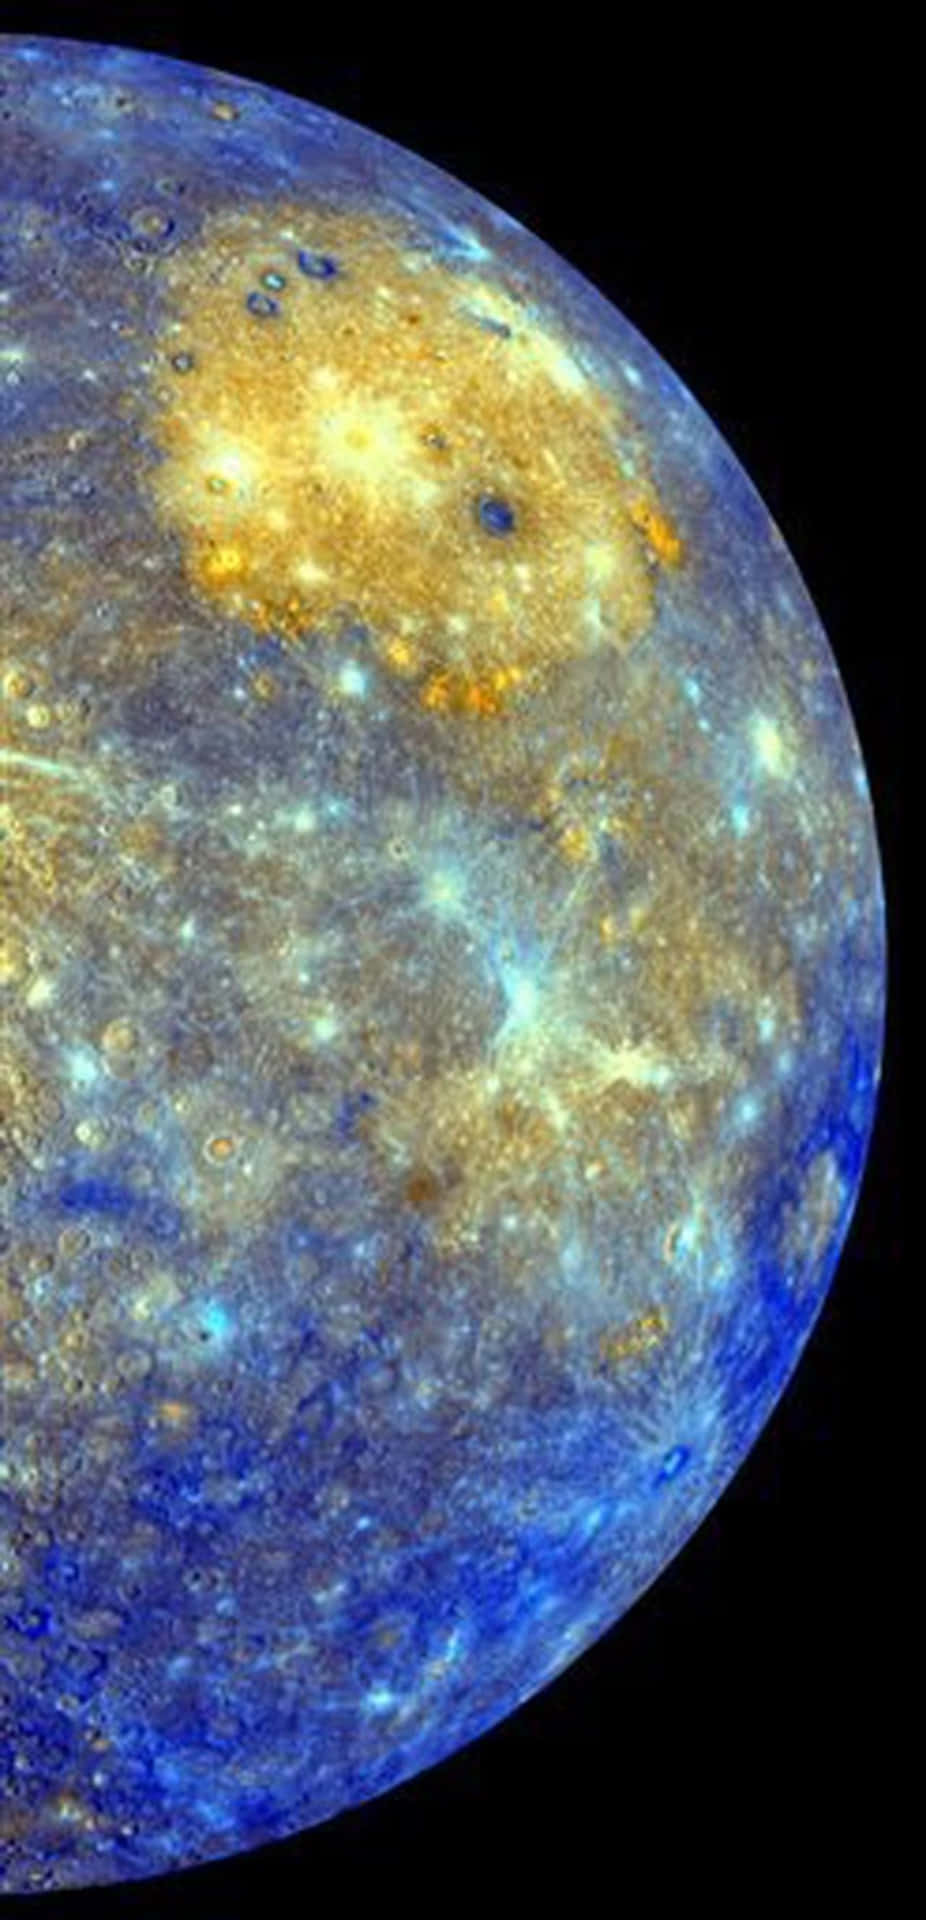 Look at the intricate details of the planet Mercury